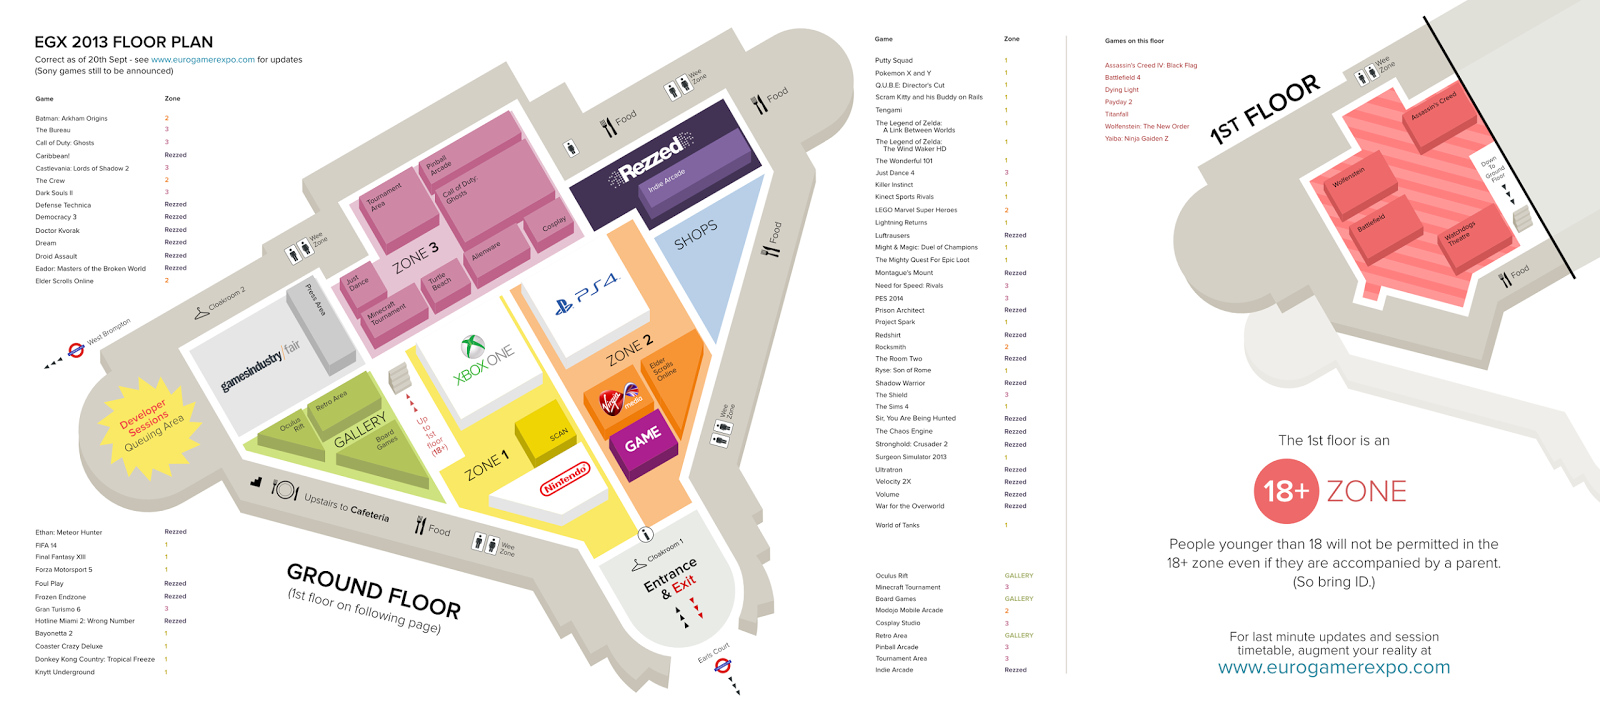 This is the floor plan from 2013's Expo... now do you see why you need a plan?